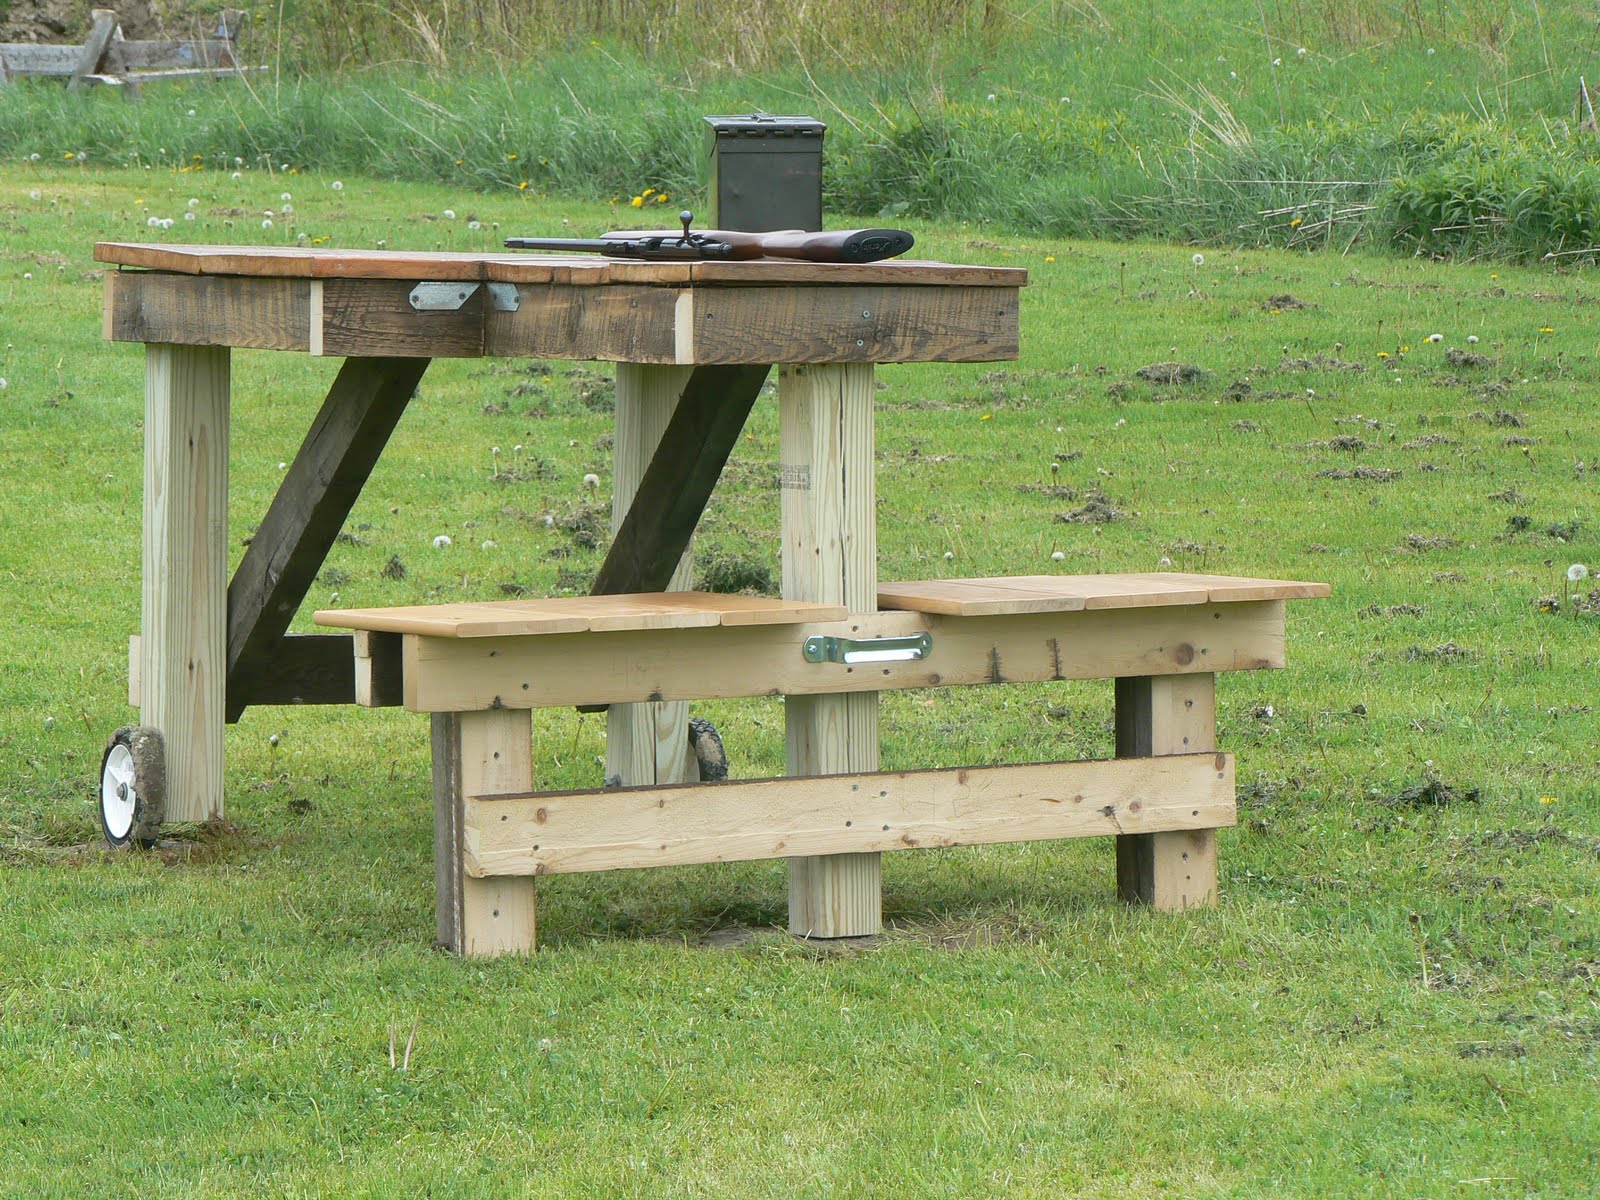 Wooden Shooting Bench Plans